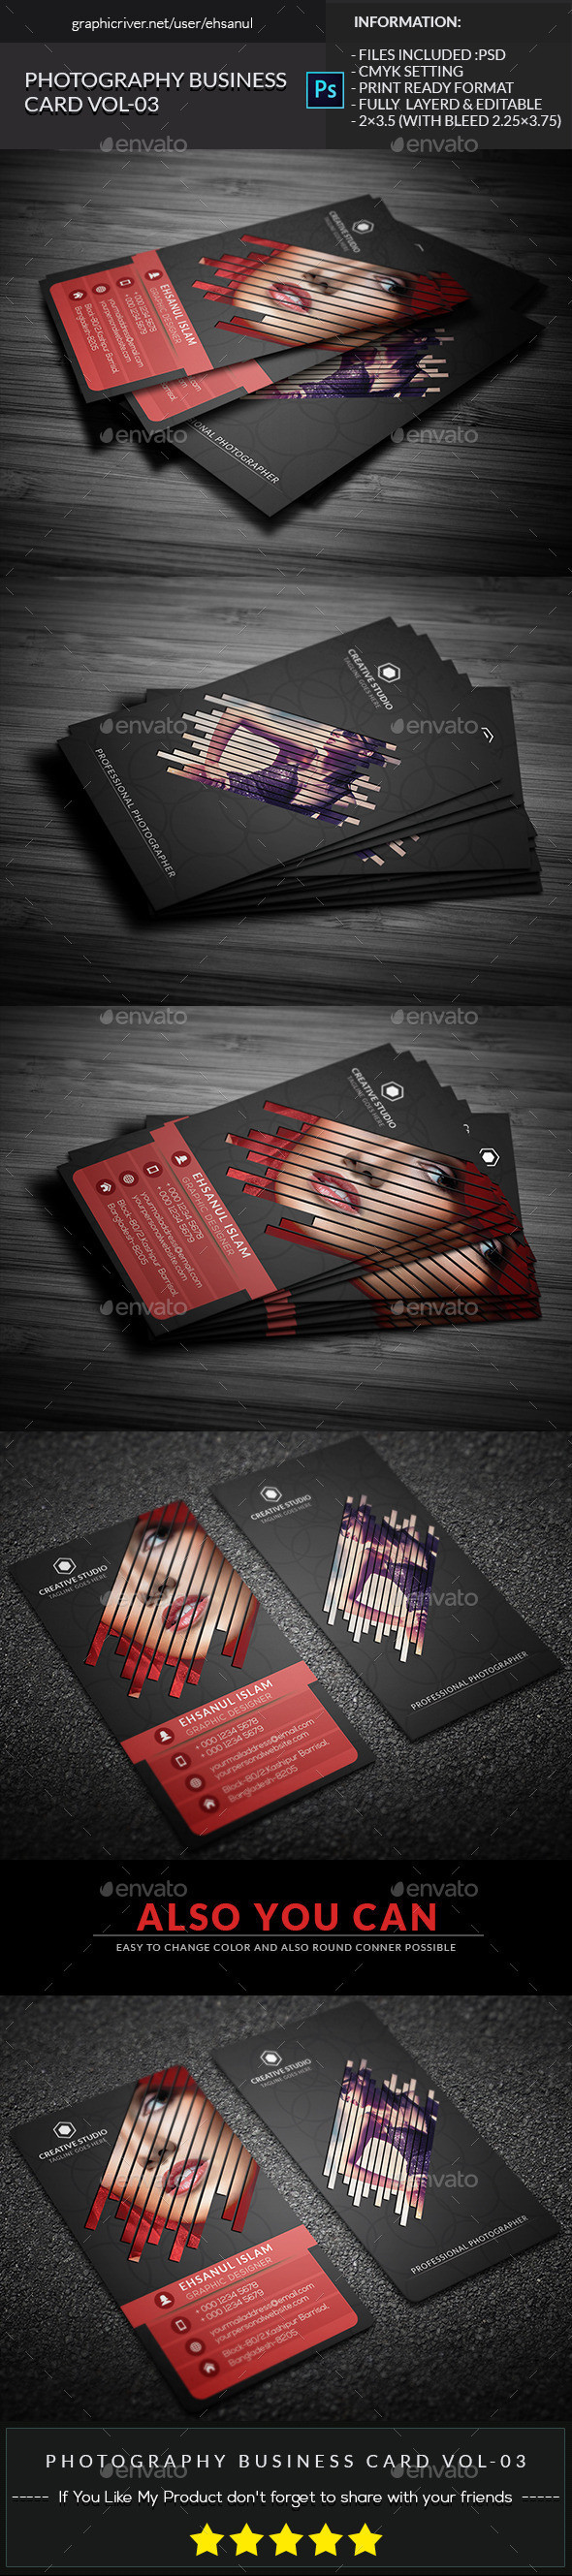 Photography 20business 20card 20vol 03